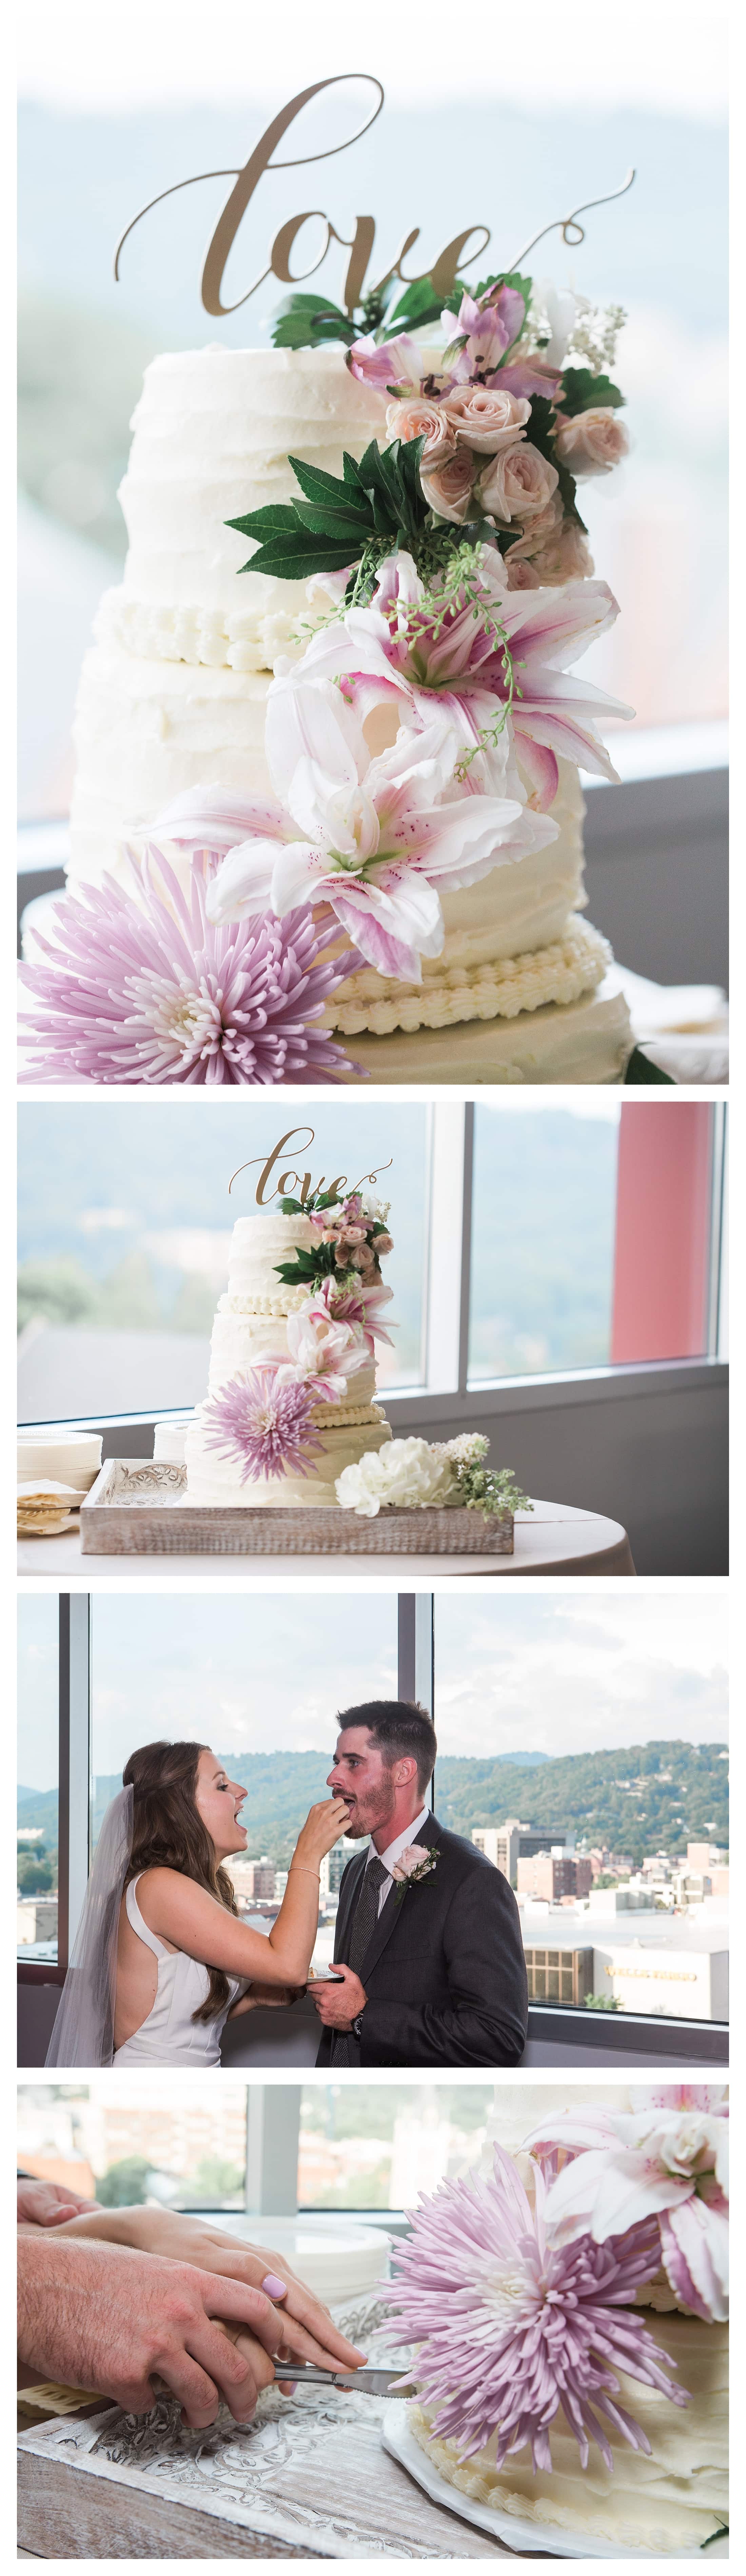 Pictures of white cwedding cake decorated with flowers and "love" topper.